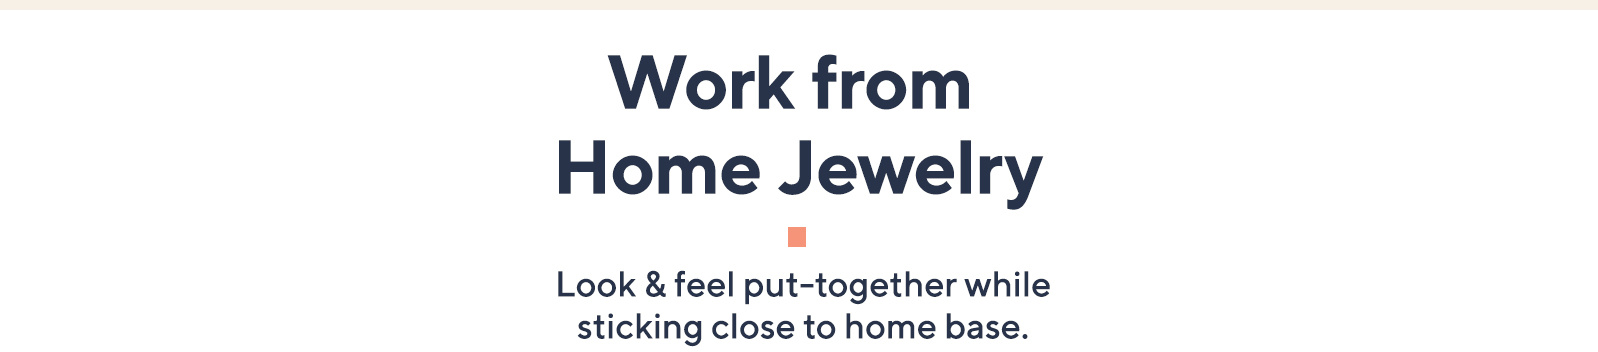 Work from Home Jewelry  Look & feel put-together while sticking close to home base.